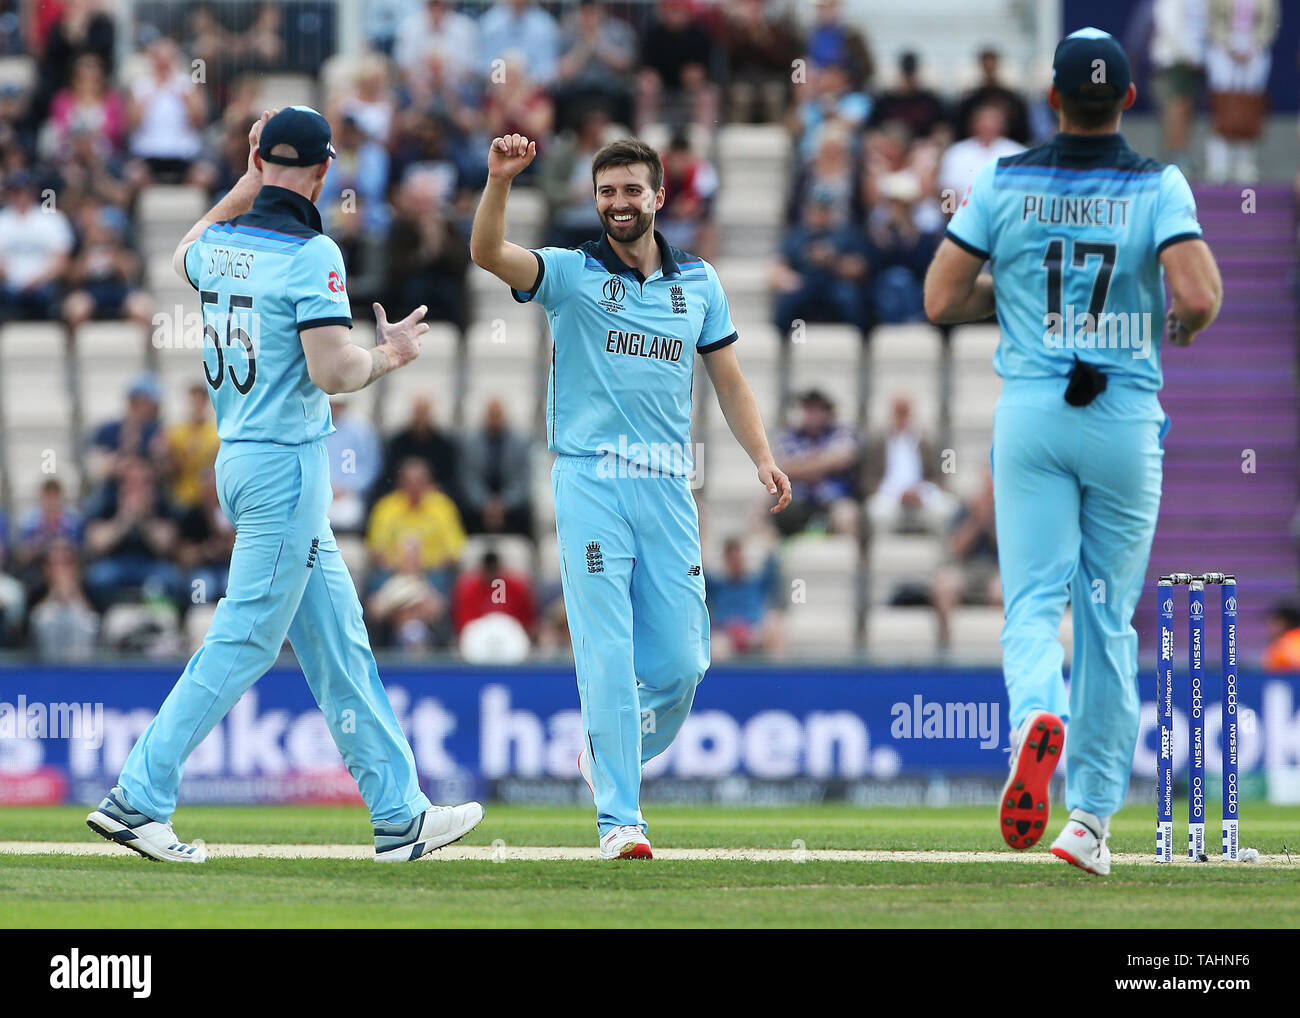 England's Mark Wood celebrates taking the wicket of Australia's Aaron Finch during the ICC Cricket World Cup Warm up match at The Hampshire Bowl, Southampton. Stock Photo